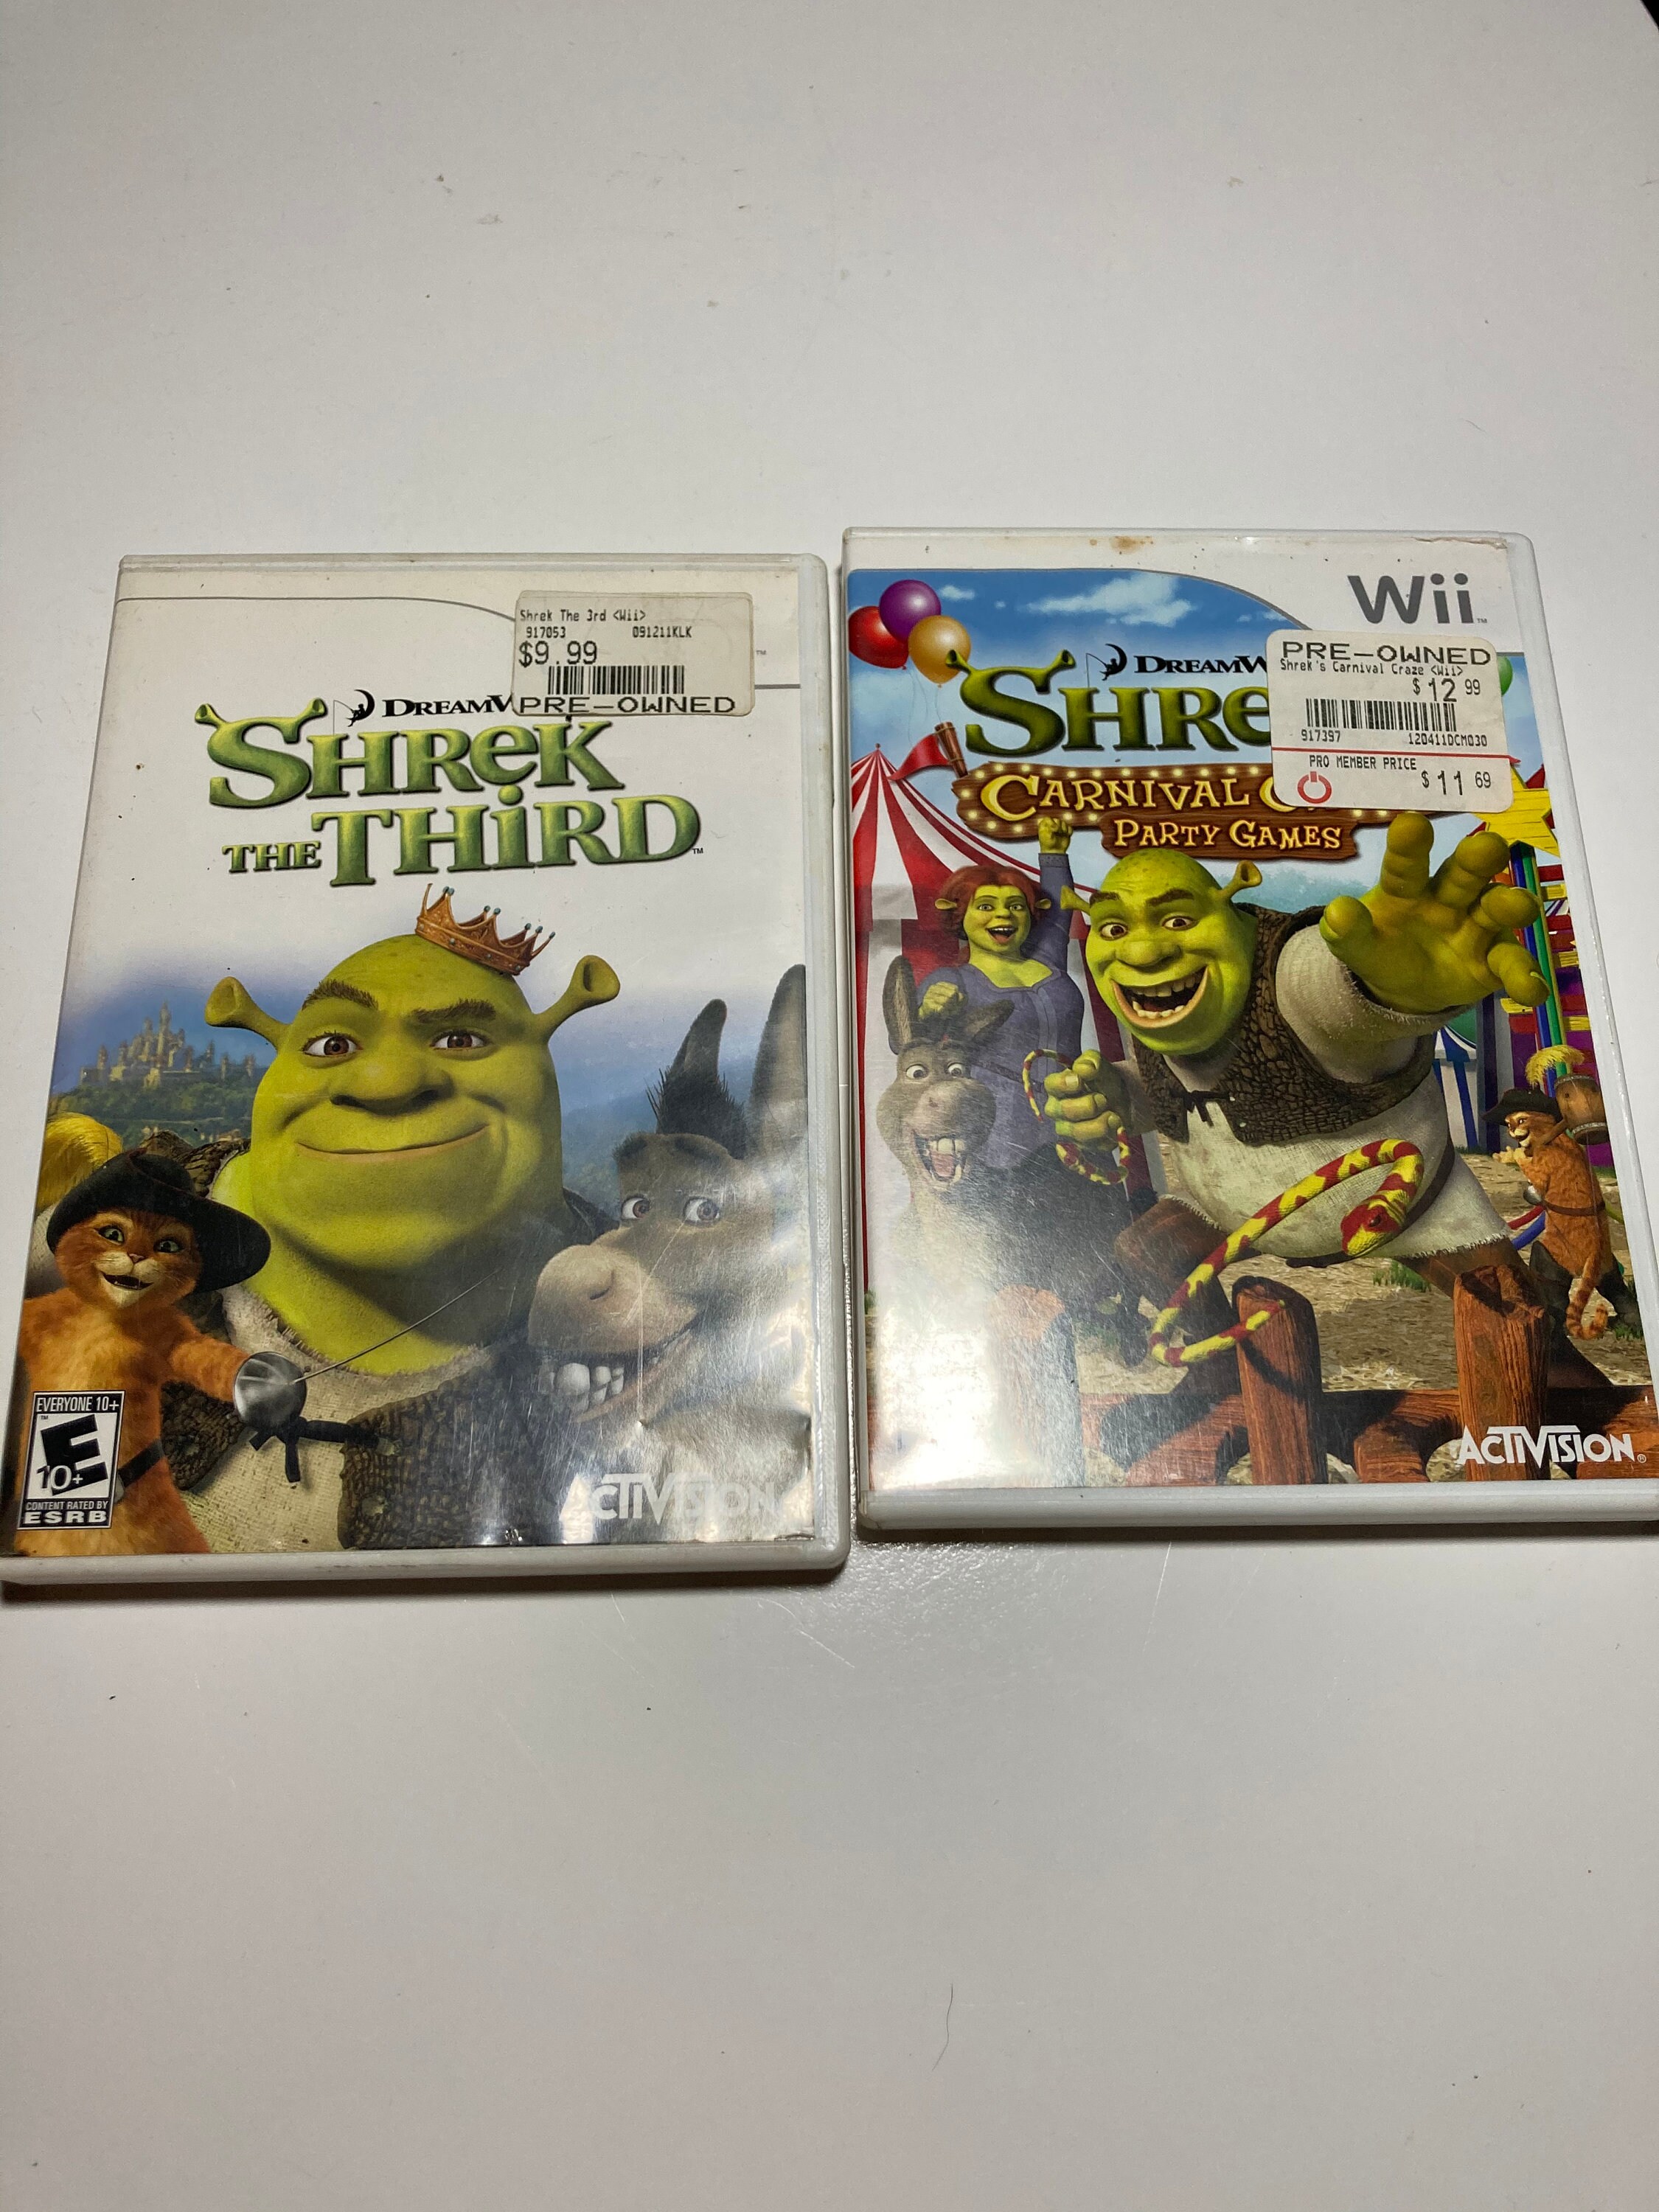 Shrek the Third Wii Video Game and Shrek Carnival Party Games - Etsy